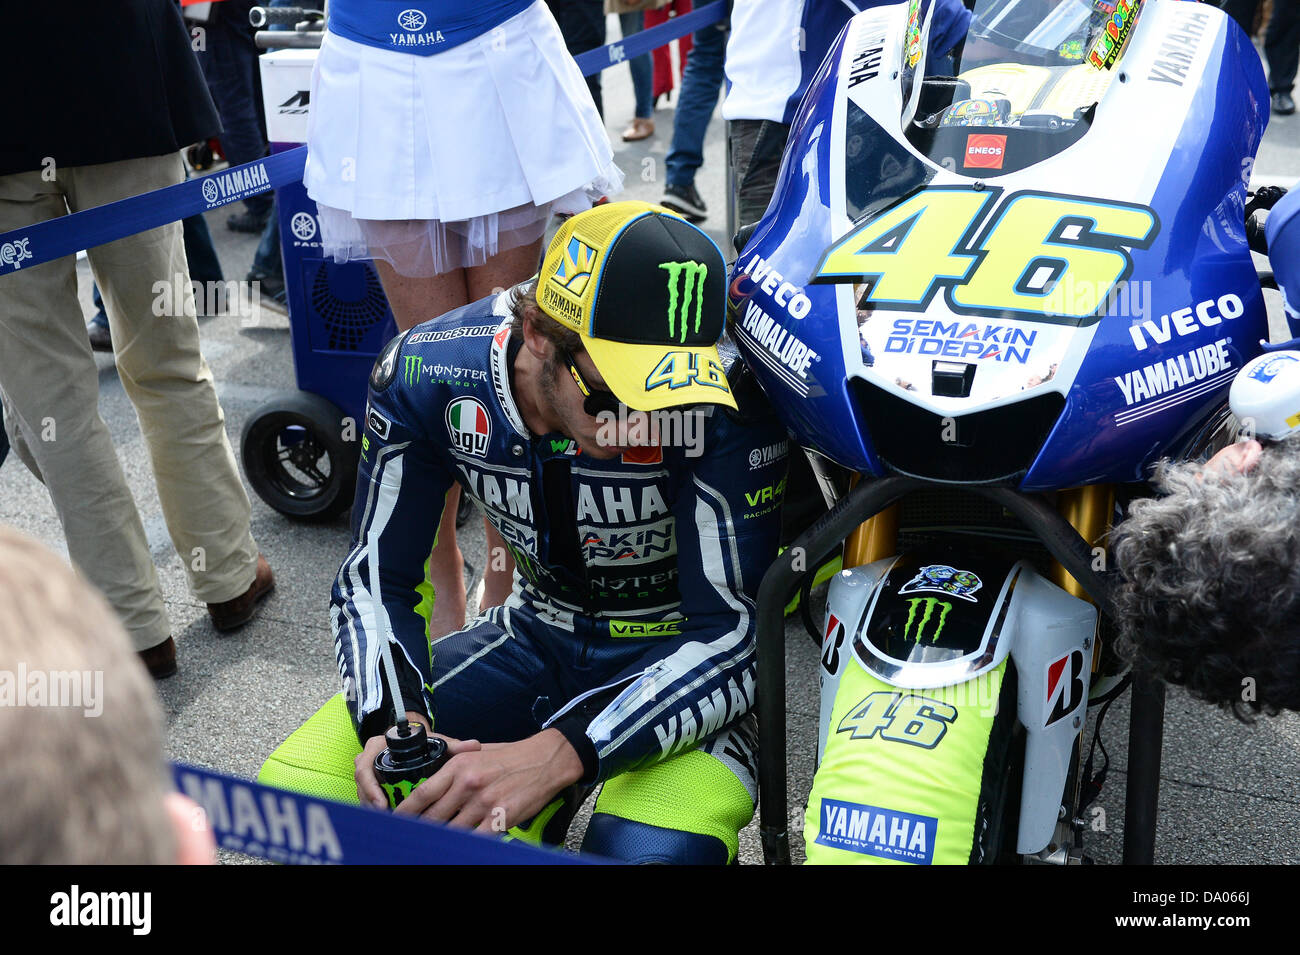 Assen, Netherlands. 29th June 2013. Valentino Rossi (Yamaha Factory Racing) on the grid line at  TT ASSEN circuit. Credit:  Gaetano Piazzolla/Alamy Live News Stock Photo